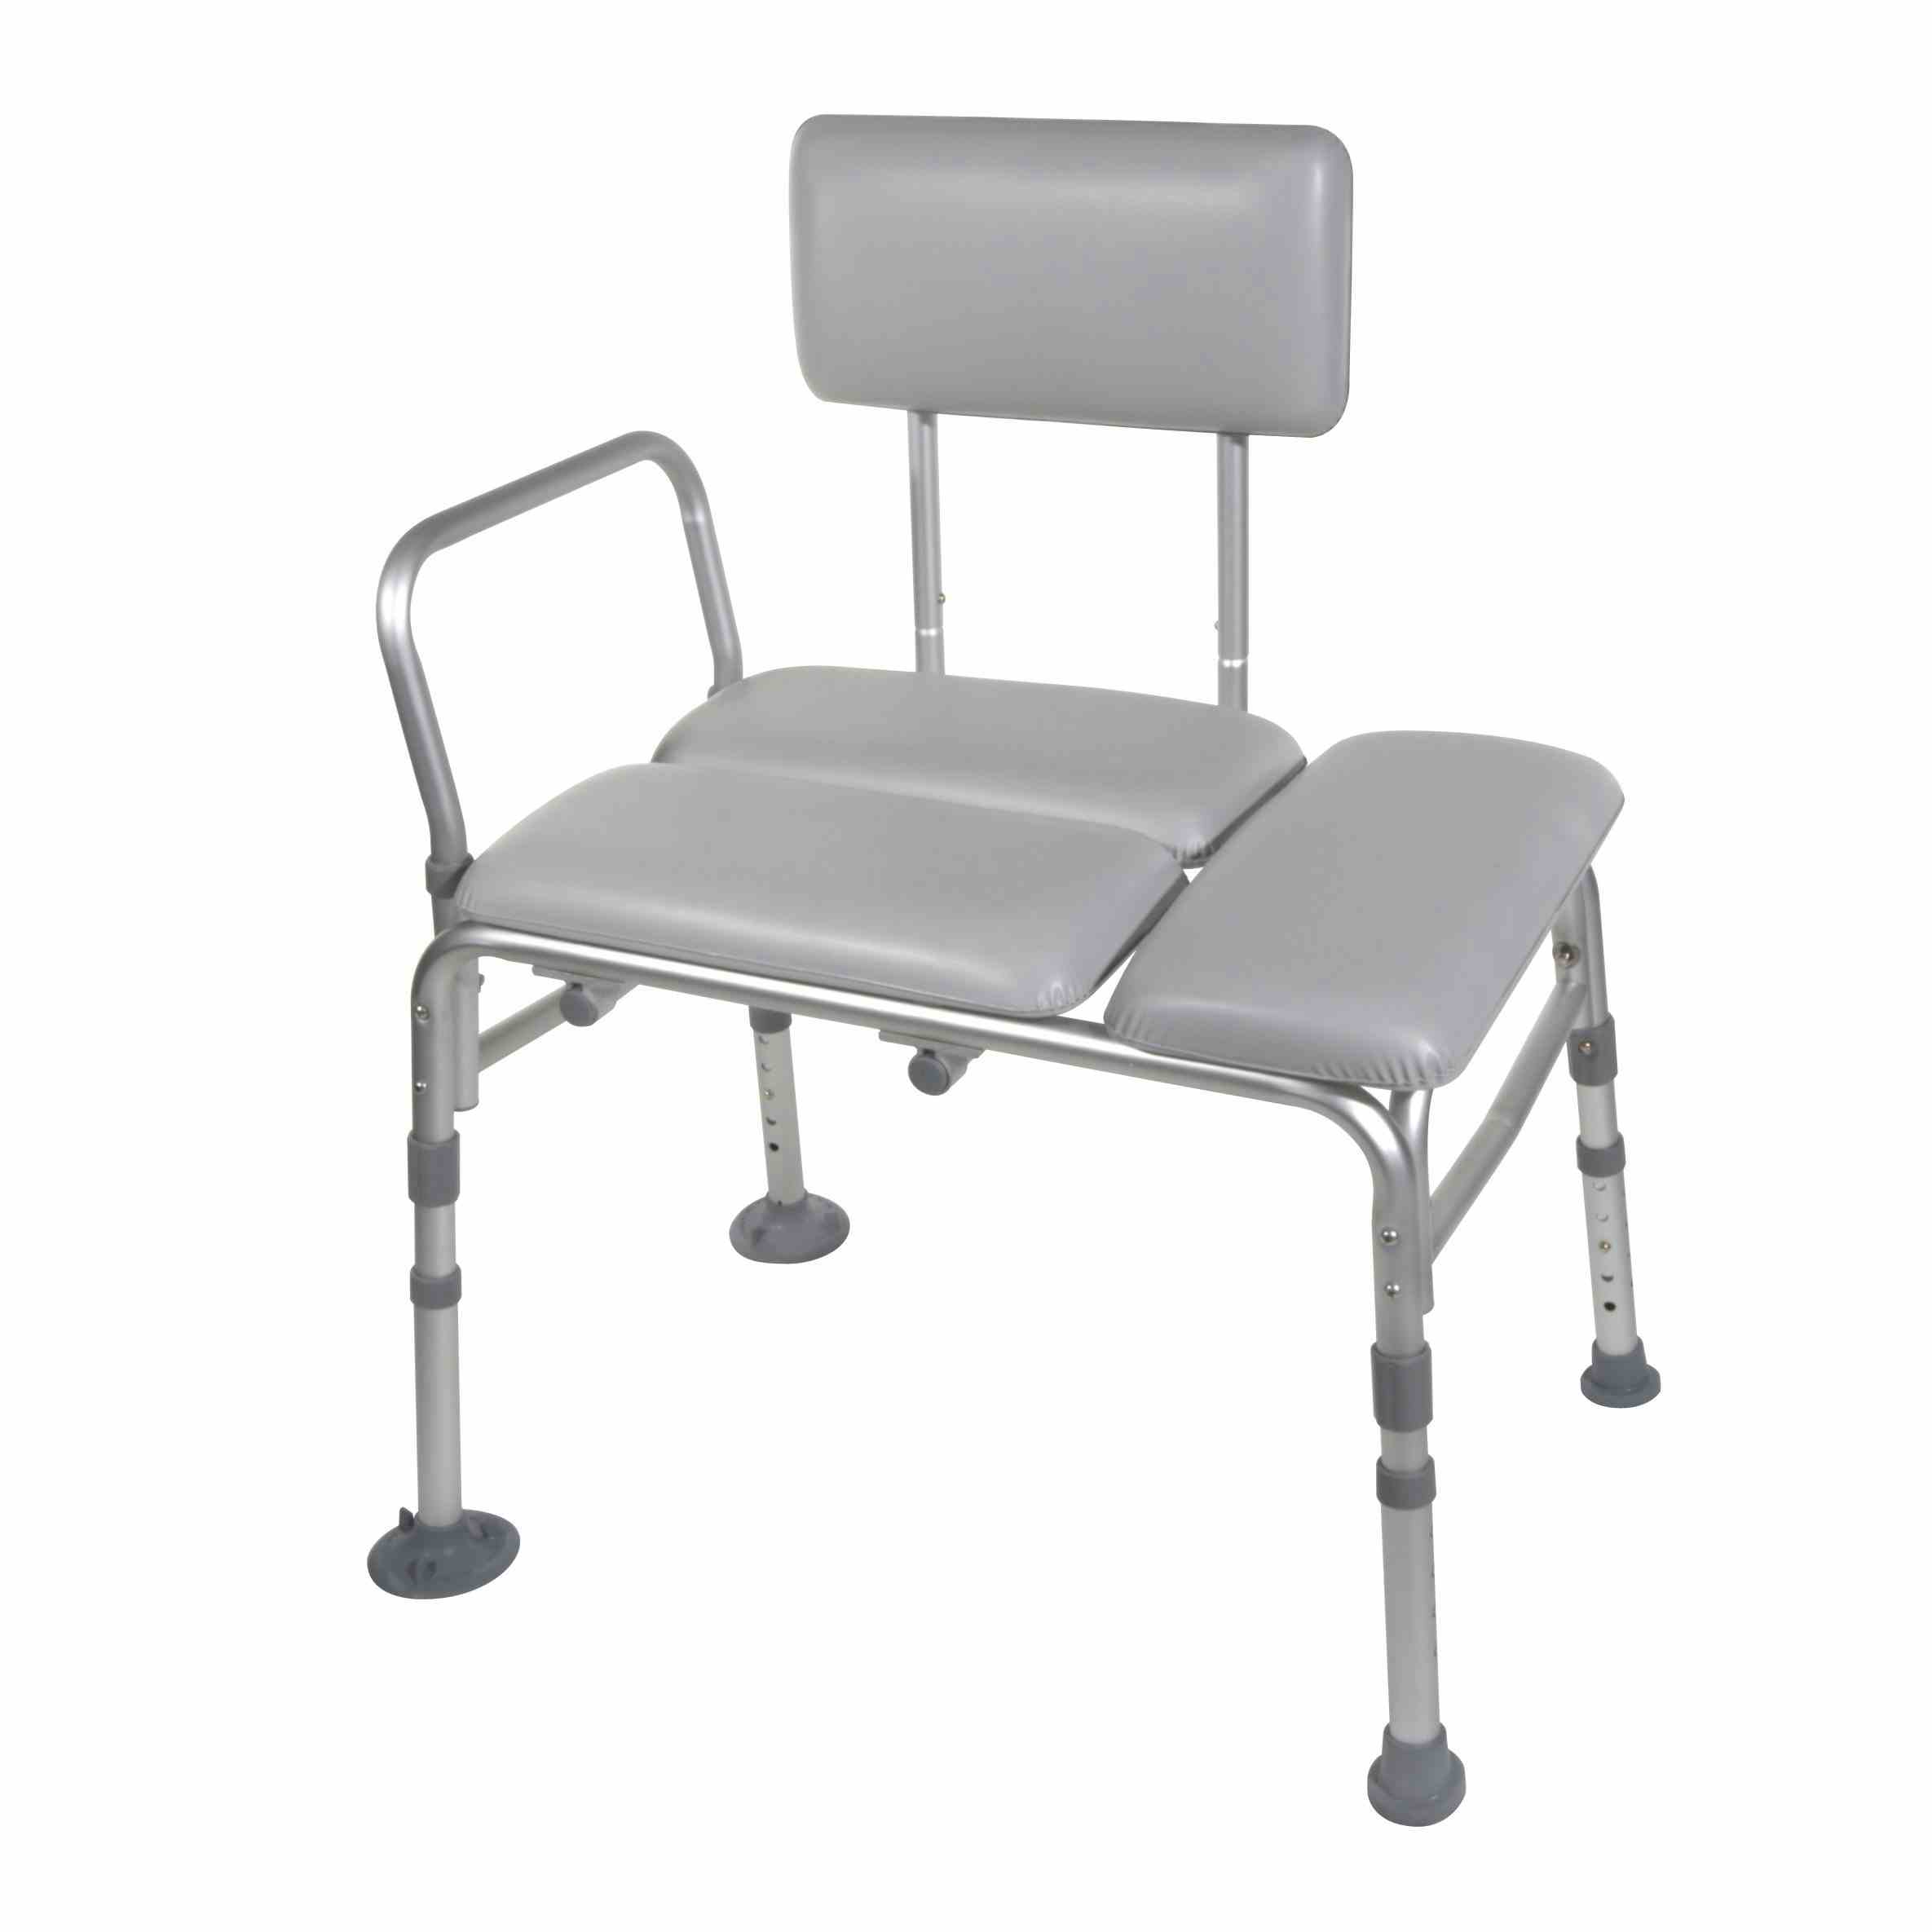 Drive Bath Transfer Bench with Padded Cushioned Seat and Backrest, 12005KD-1-EA1, 1 Bench